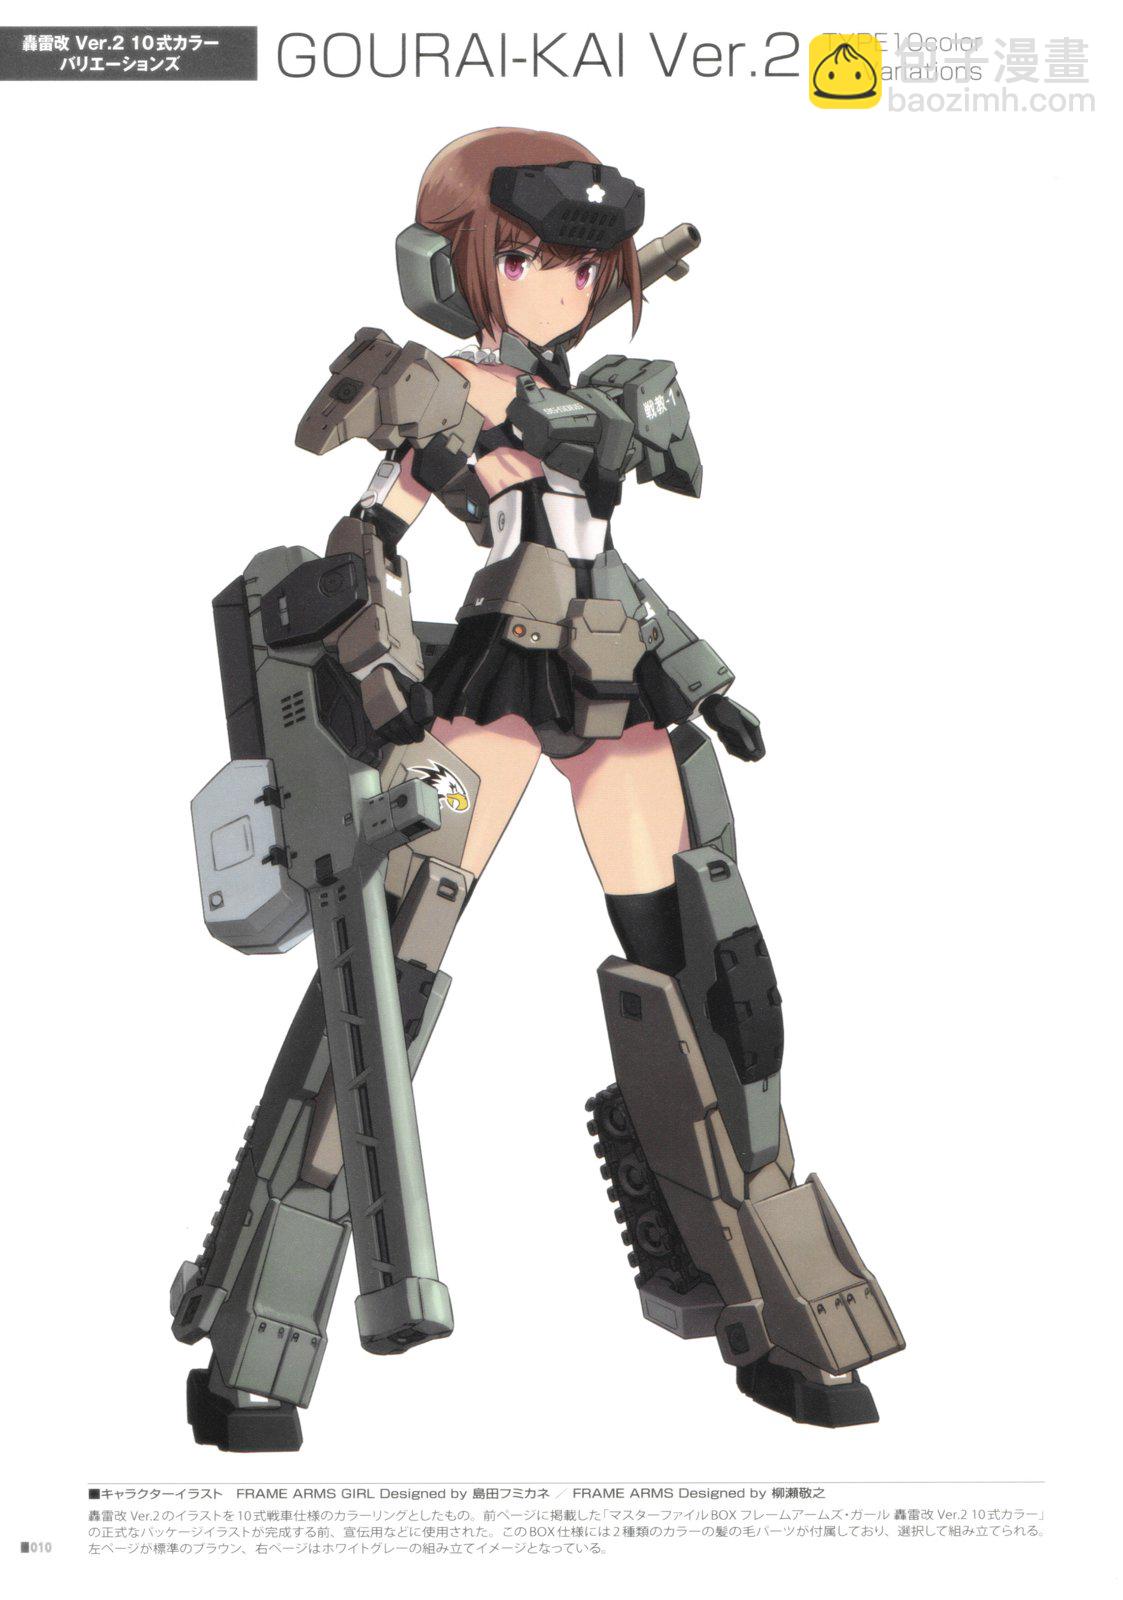 FRAME ARMS GIRL DESIGNERS NOTE - 全一卷(1/5) - 1